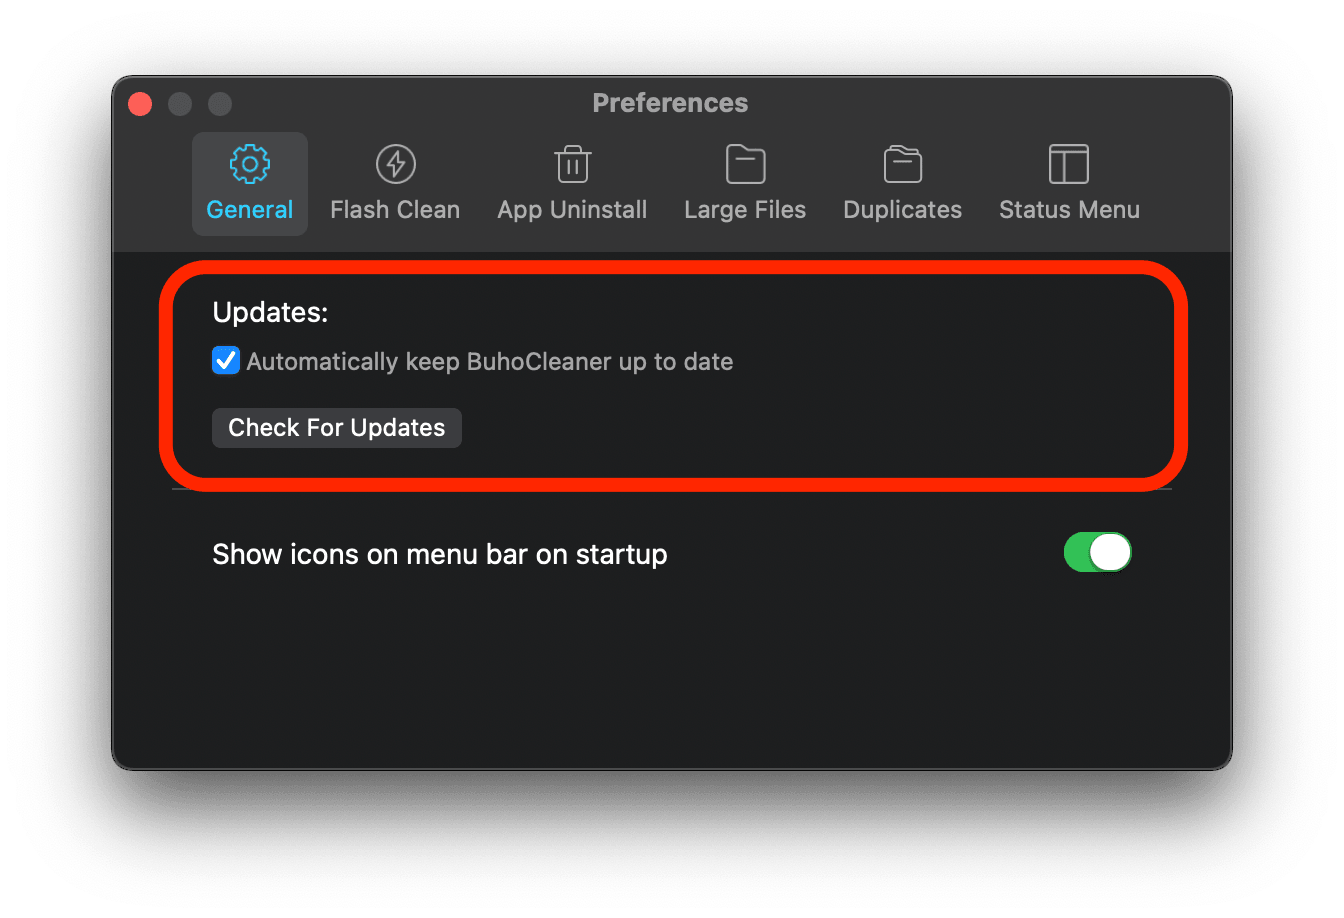 BuhoCleaner Automatically Update